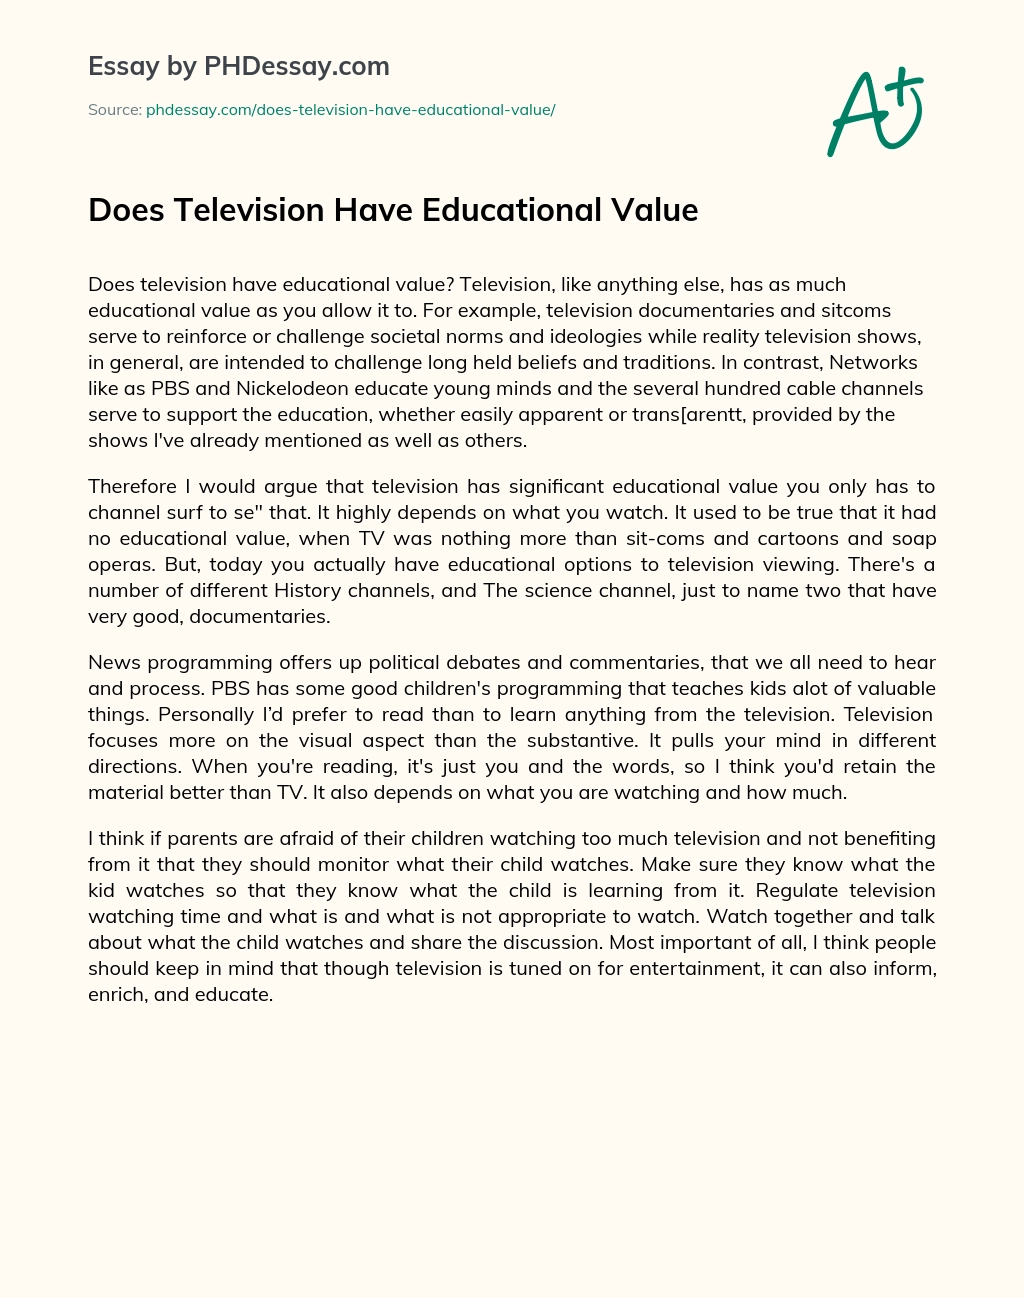 Does Television Have Educational Value essay